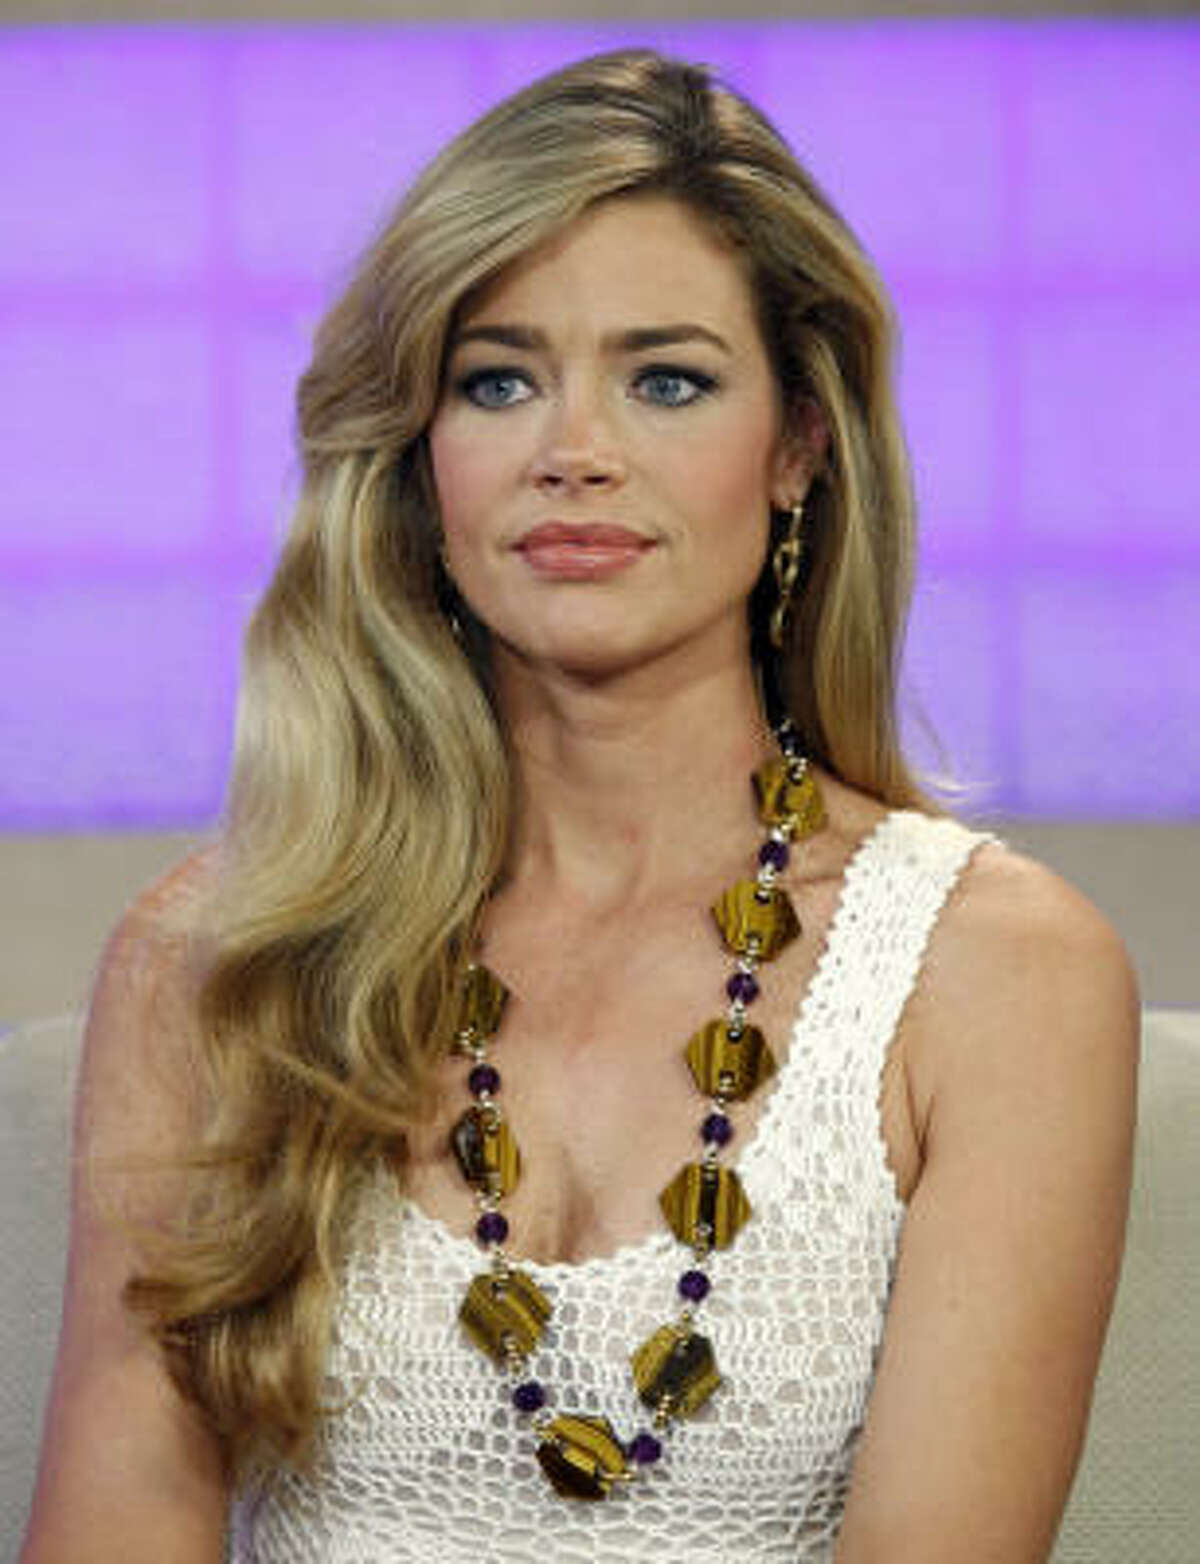 Denise Richards Richards posed for Playboy just five months after having a baby.